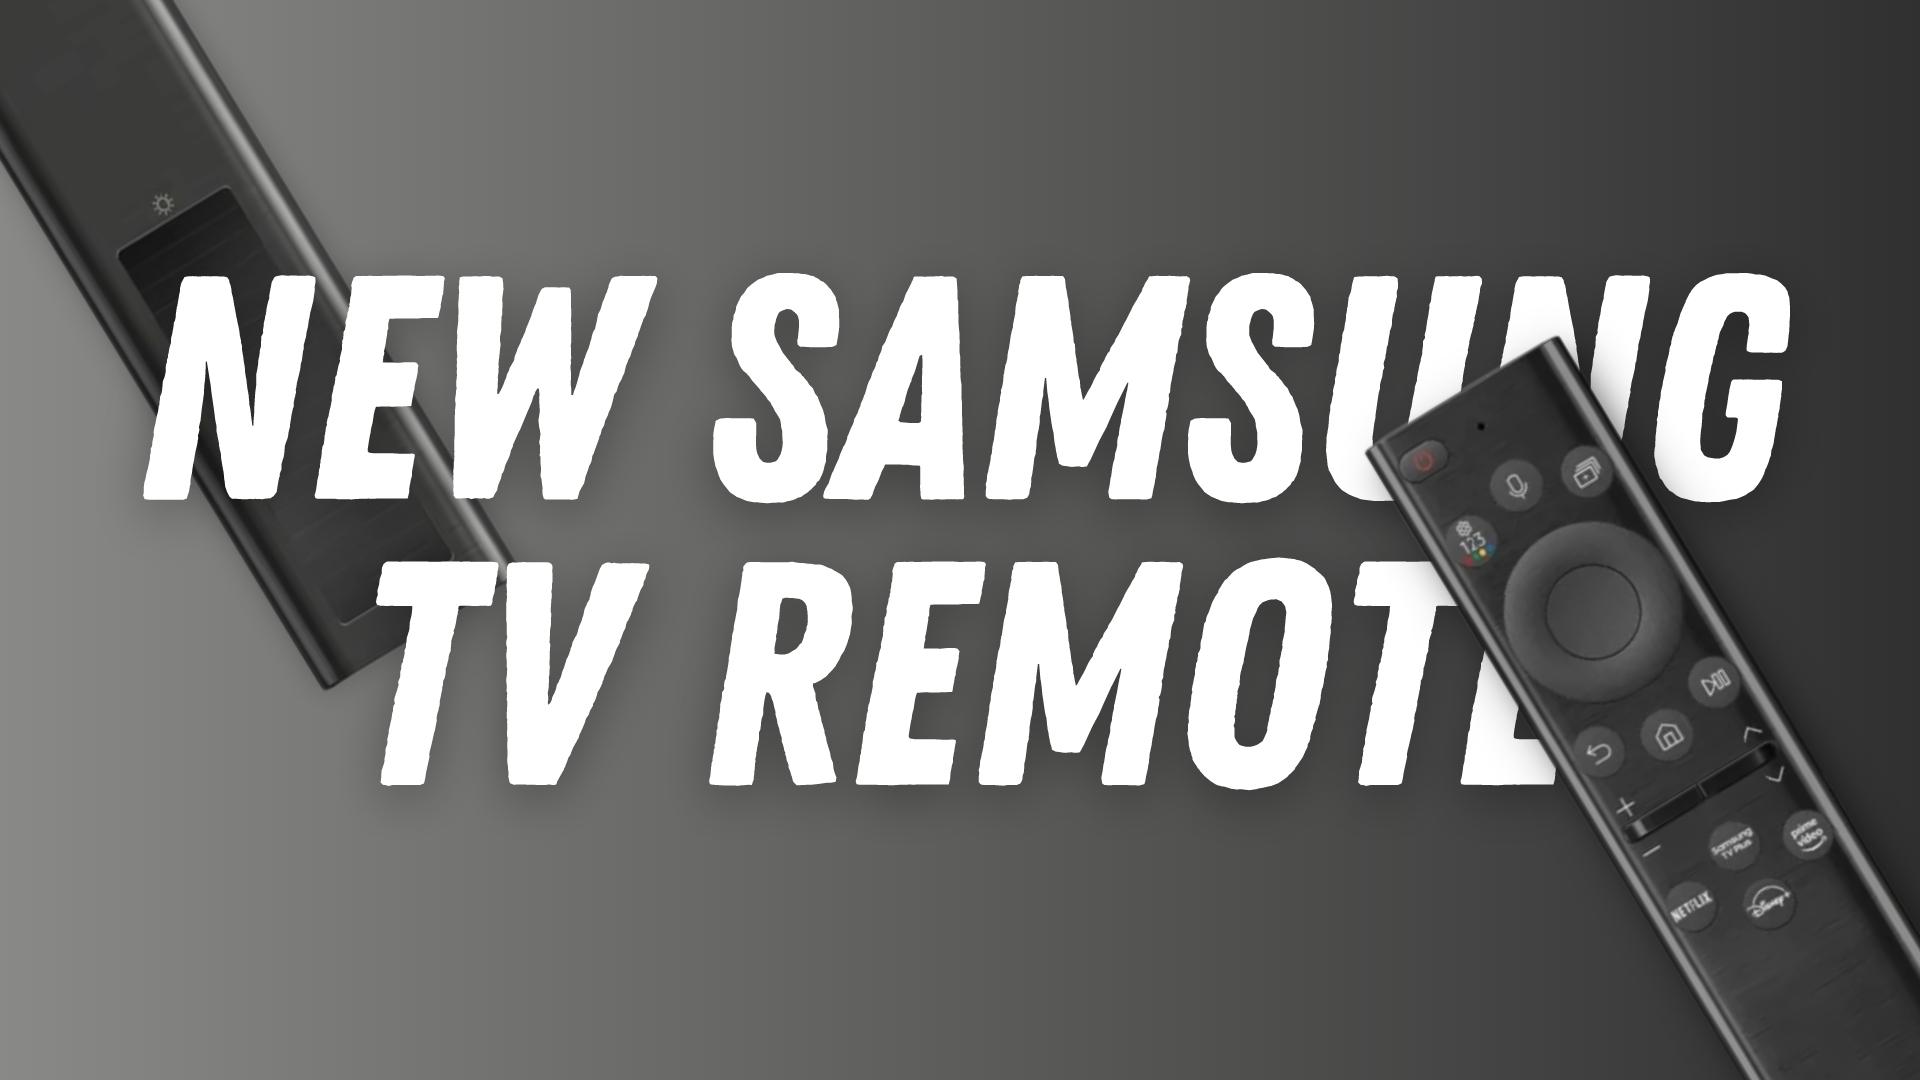 New Samsung TV remote charges through router's radio waves